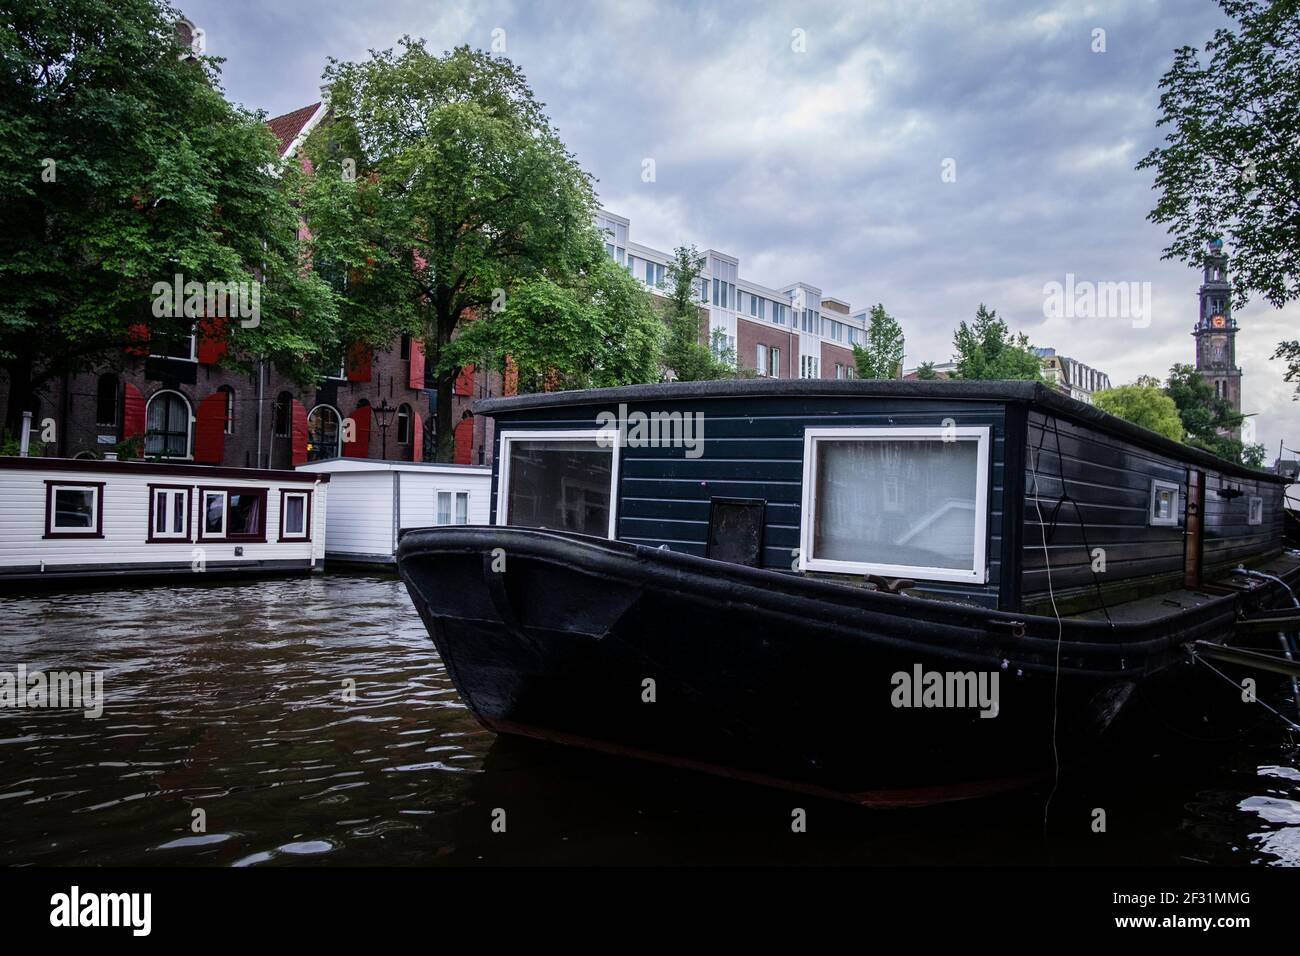 Amsterdam Canals are famous for their houseboats Stock Photo